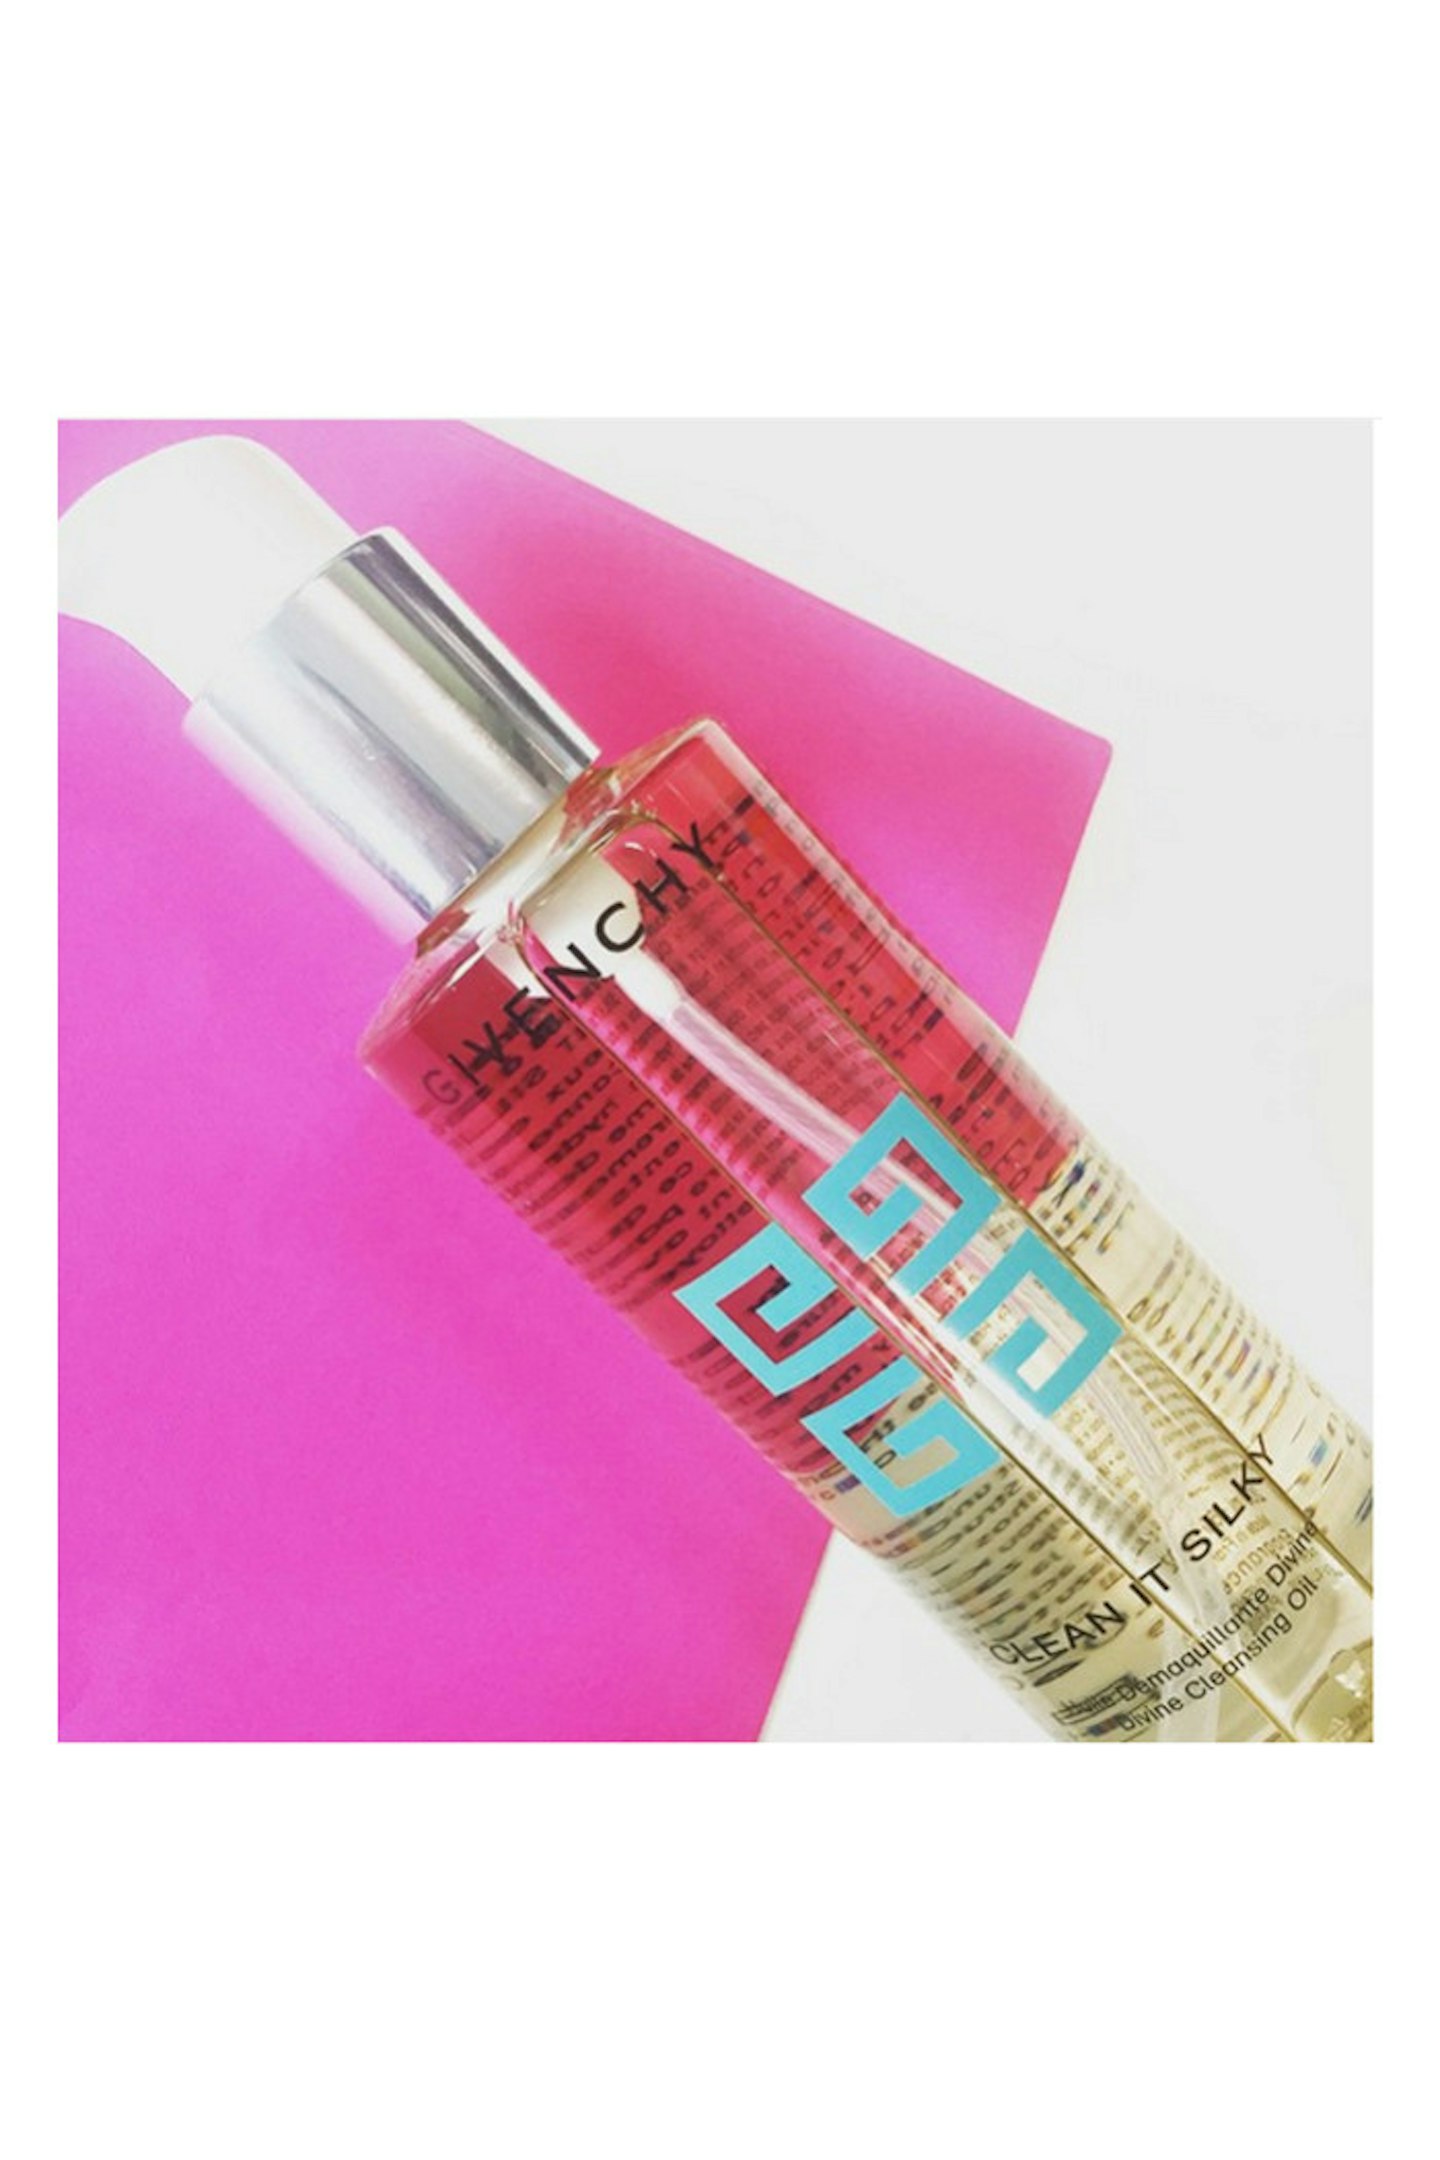 Givenchy Clean It Silky Divine Cleansing Oil, £24.50